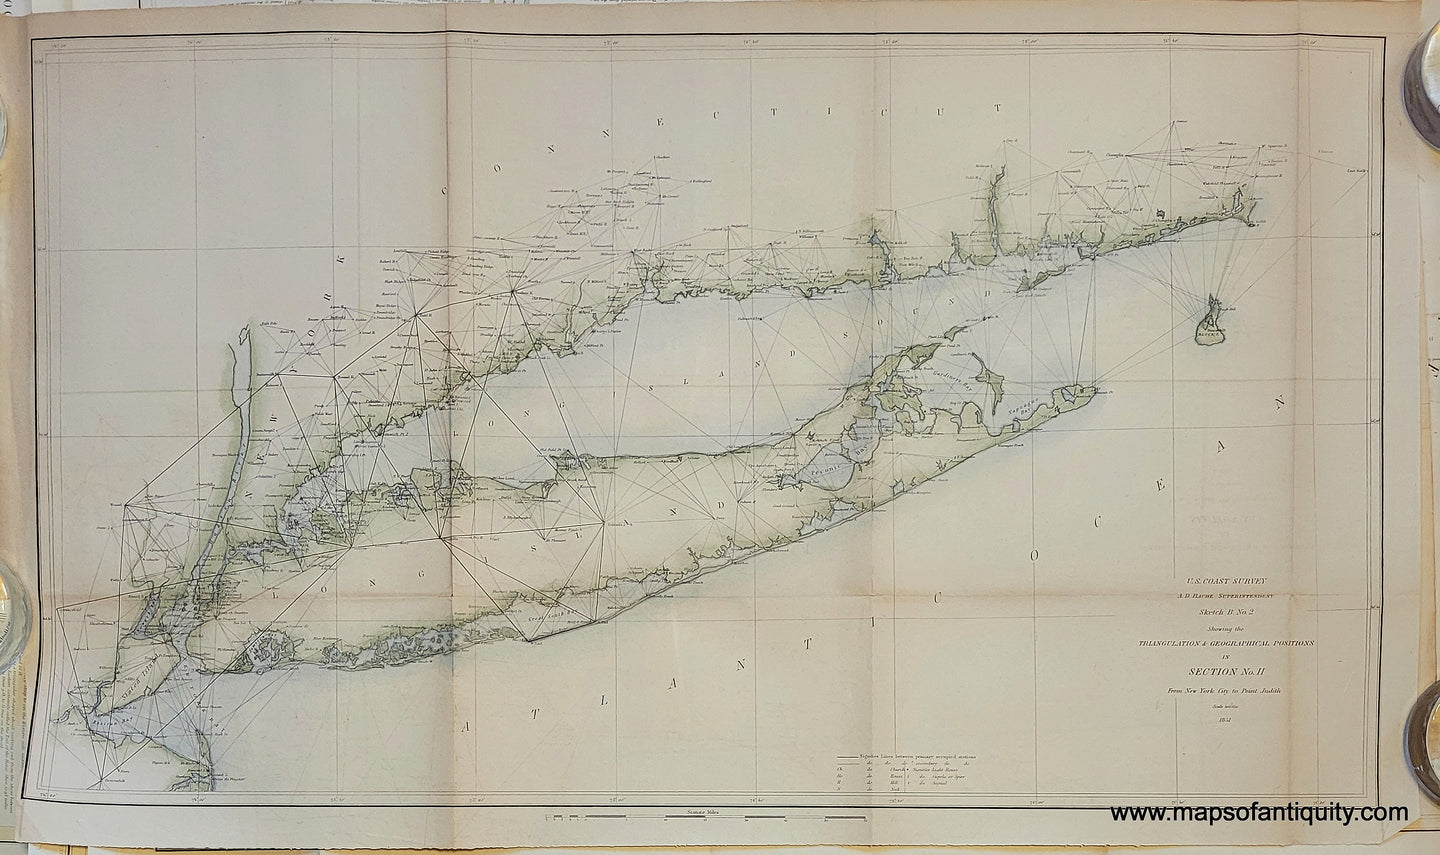 Antique-Map-Coast-Long-Island-Connecticut-Coastal-Report-Chart-United-States-Survey-Sketch-B-No.-2-II-New-York-City-to-Point-Judith-Triangulation-Geographical-Positions-1851-1850s-1800s-Mid-19th-Century-Maps-of-Antiquity